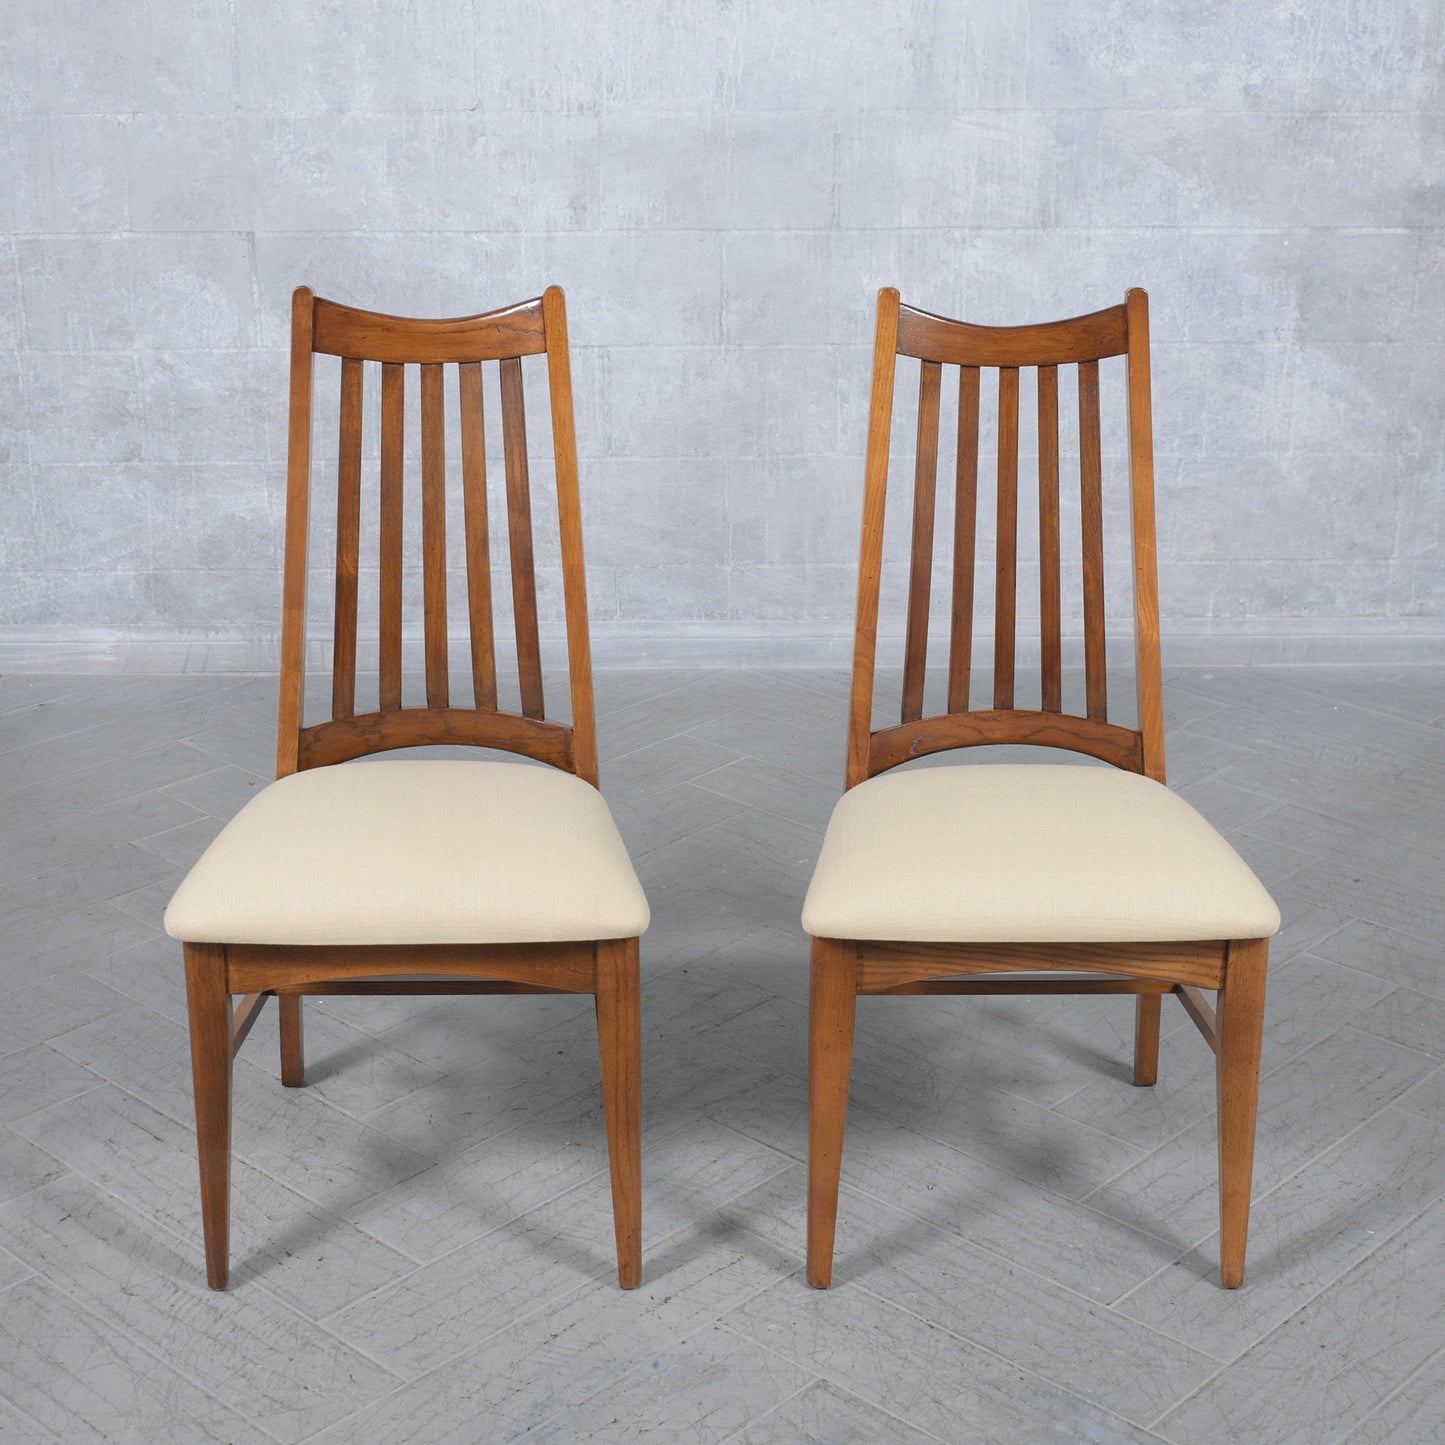 Revitalized Set of Six Mid-Century Modern White Oak Dining Chairs from the 1960s